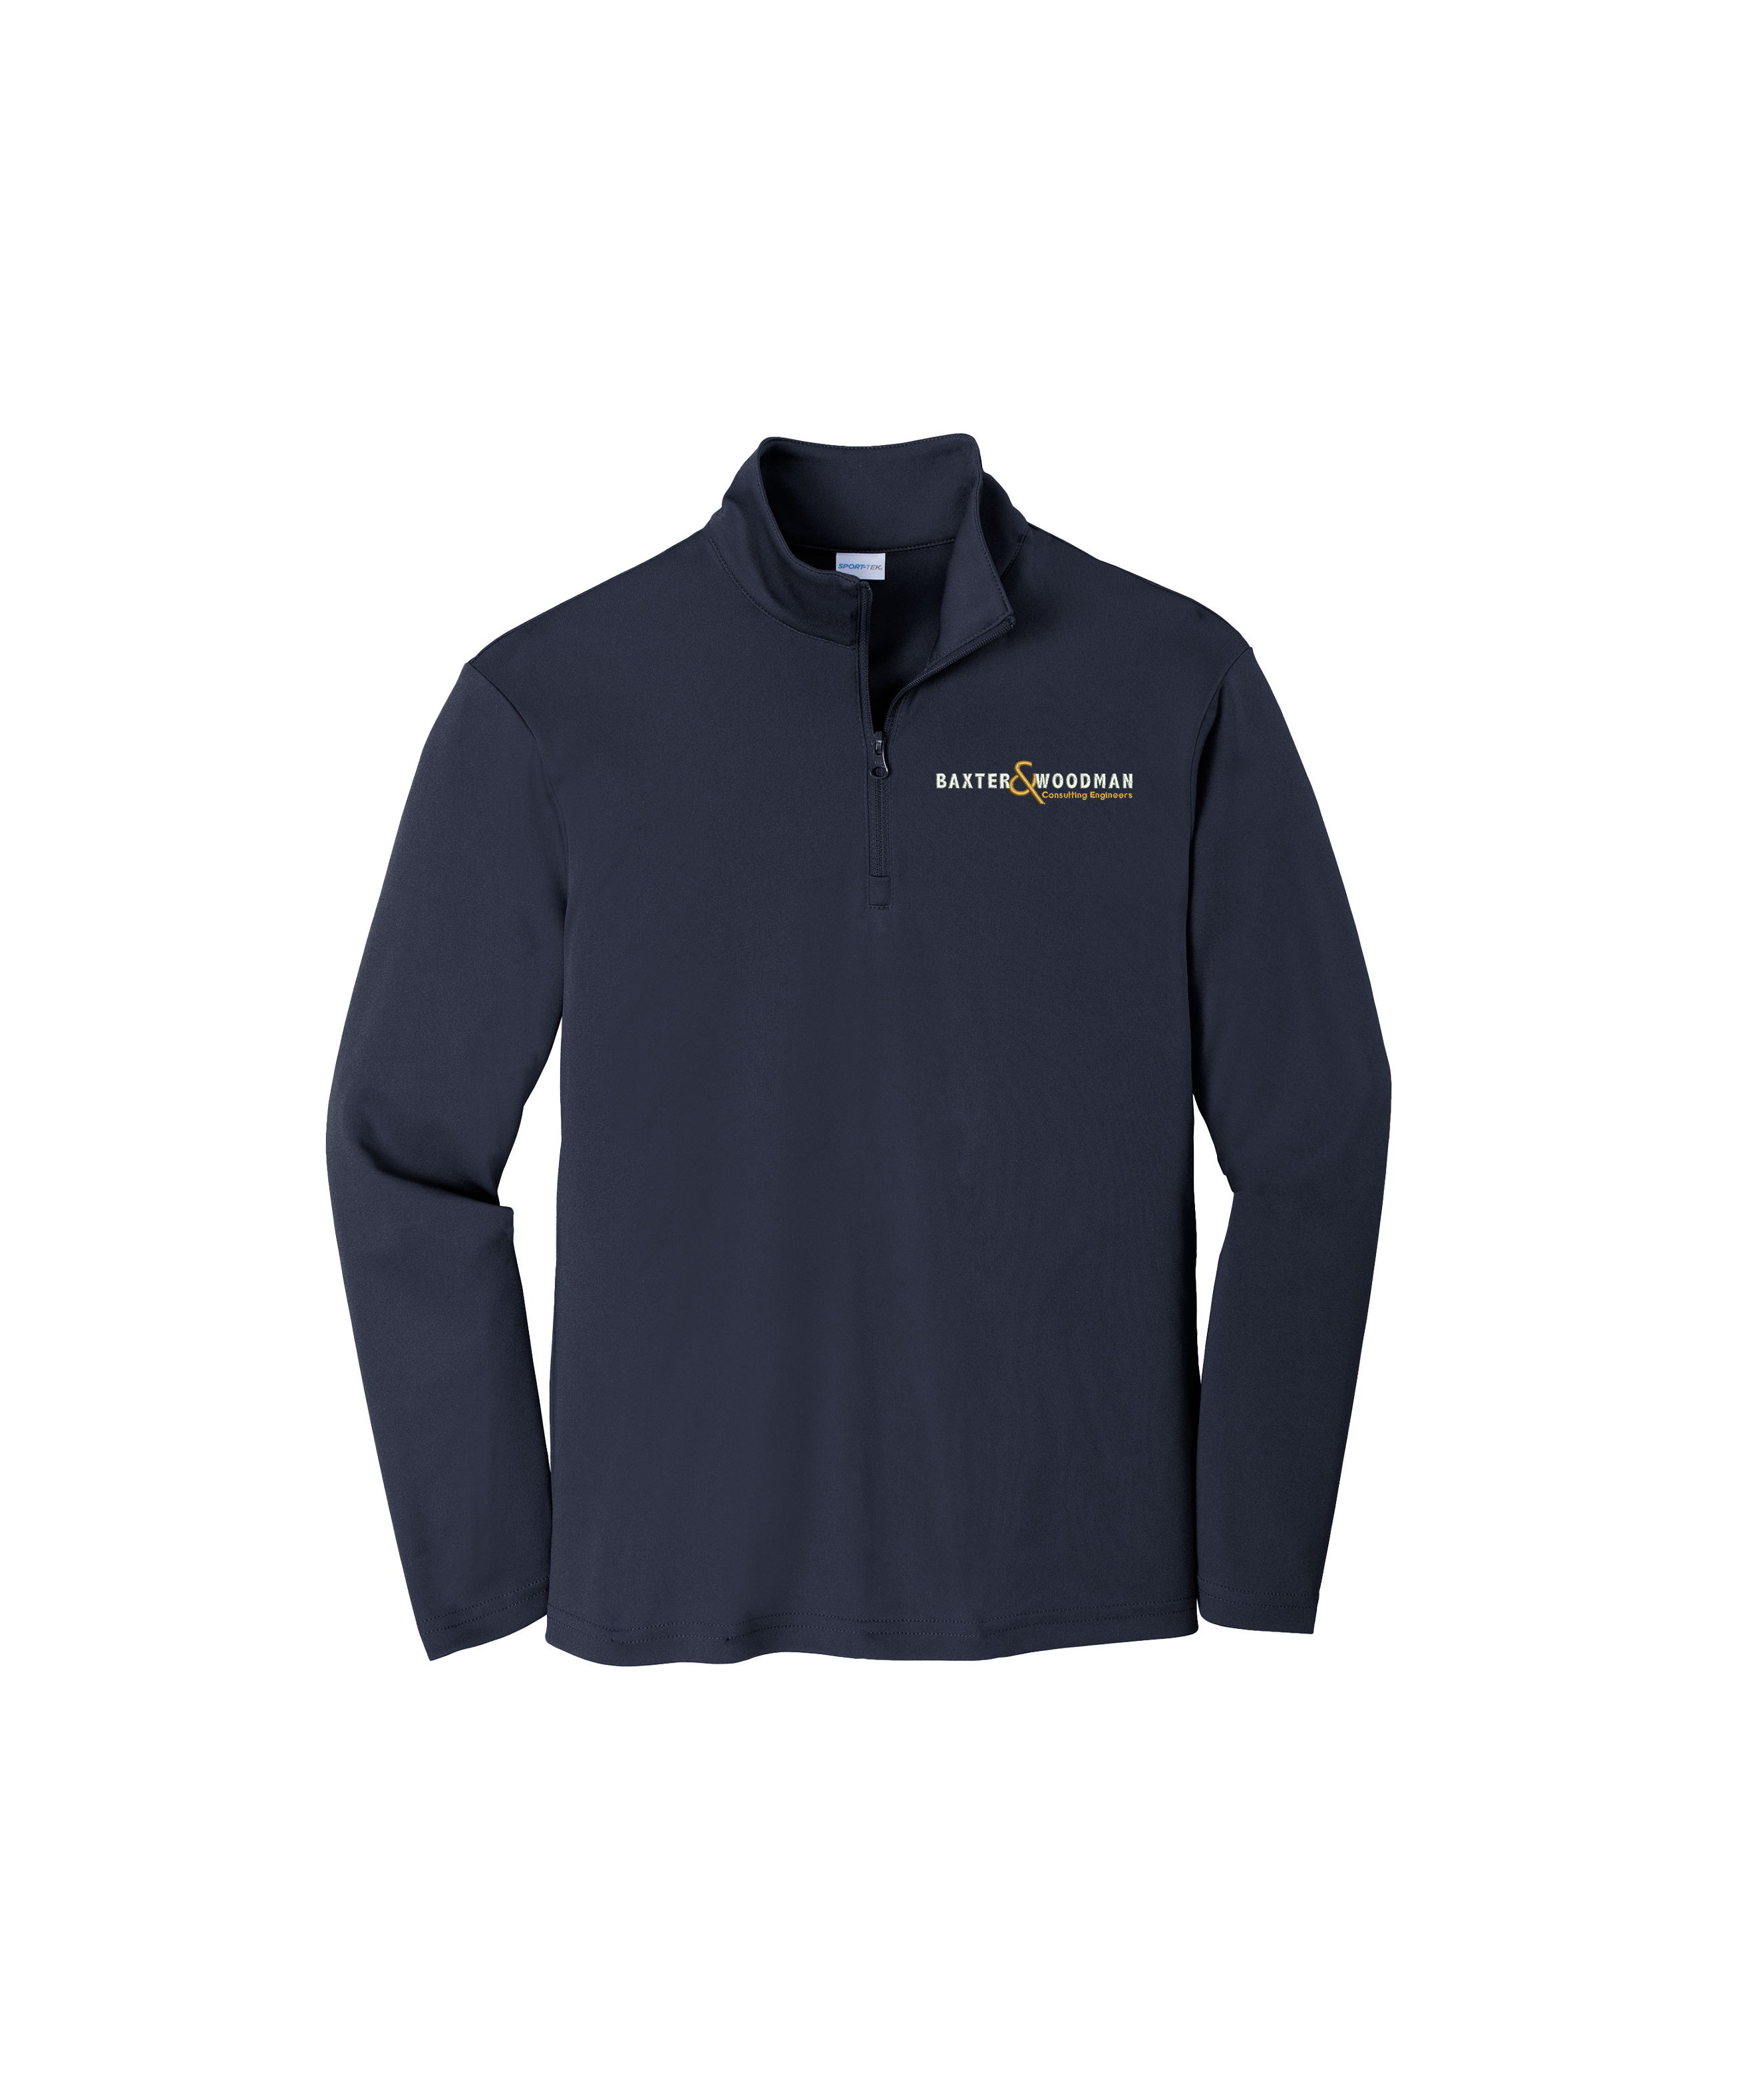 Sport-Tek Youth PosiCharge Competitor 1/4-Zip Pullover